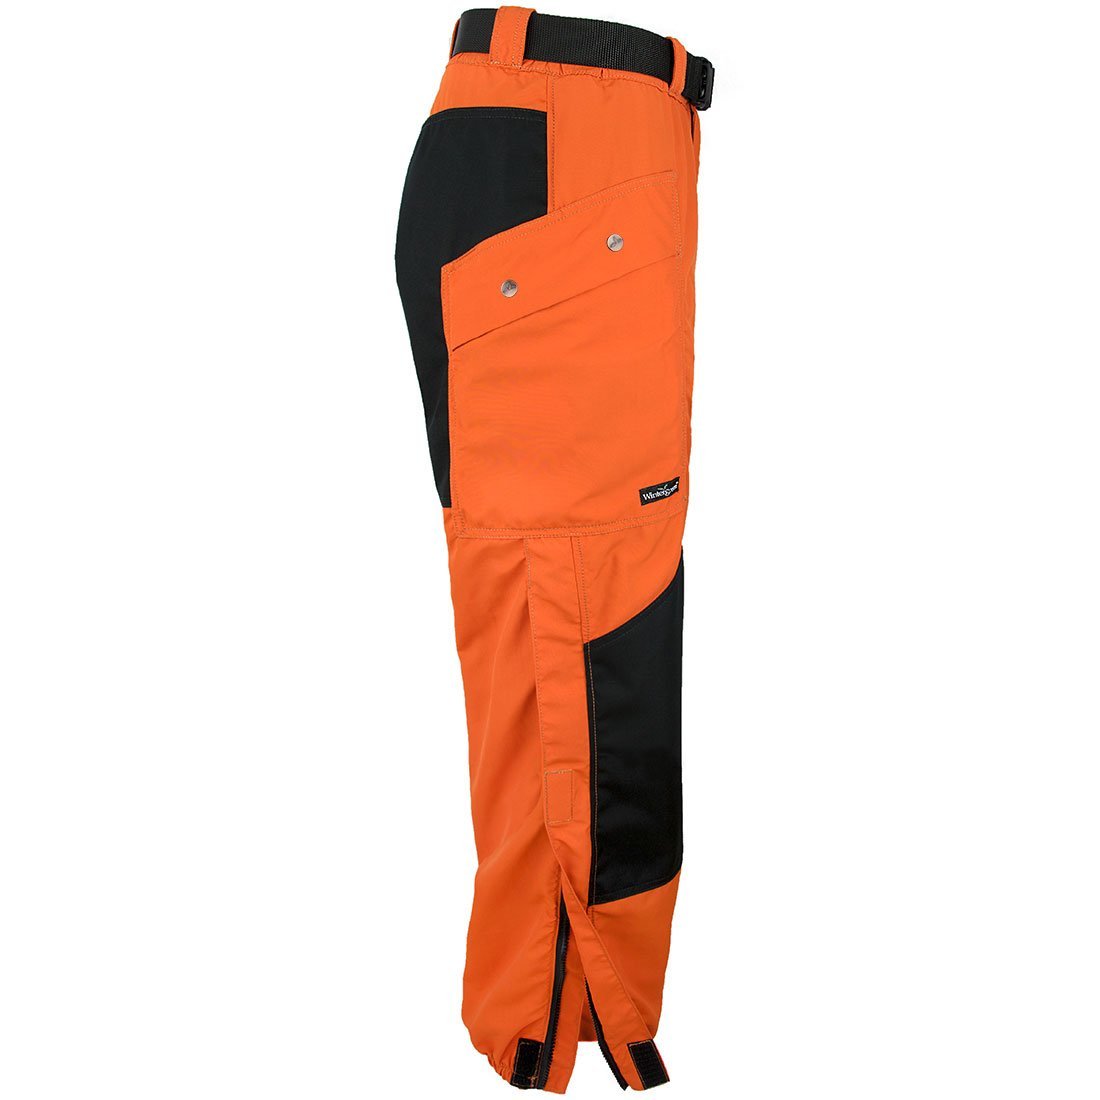 Womens Stretch Charger Pants - Wintergreen